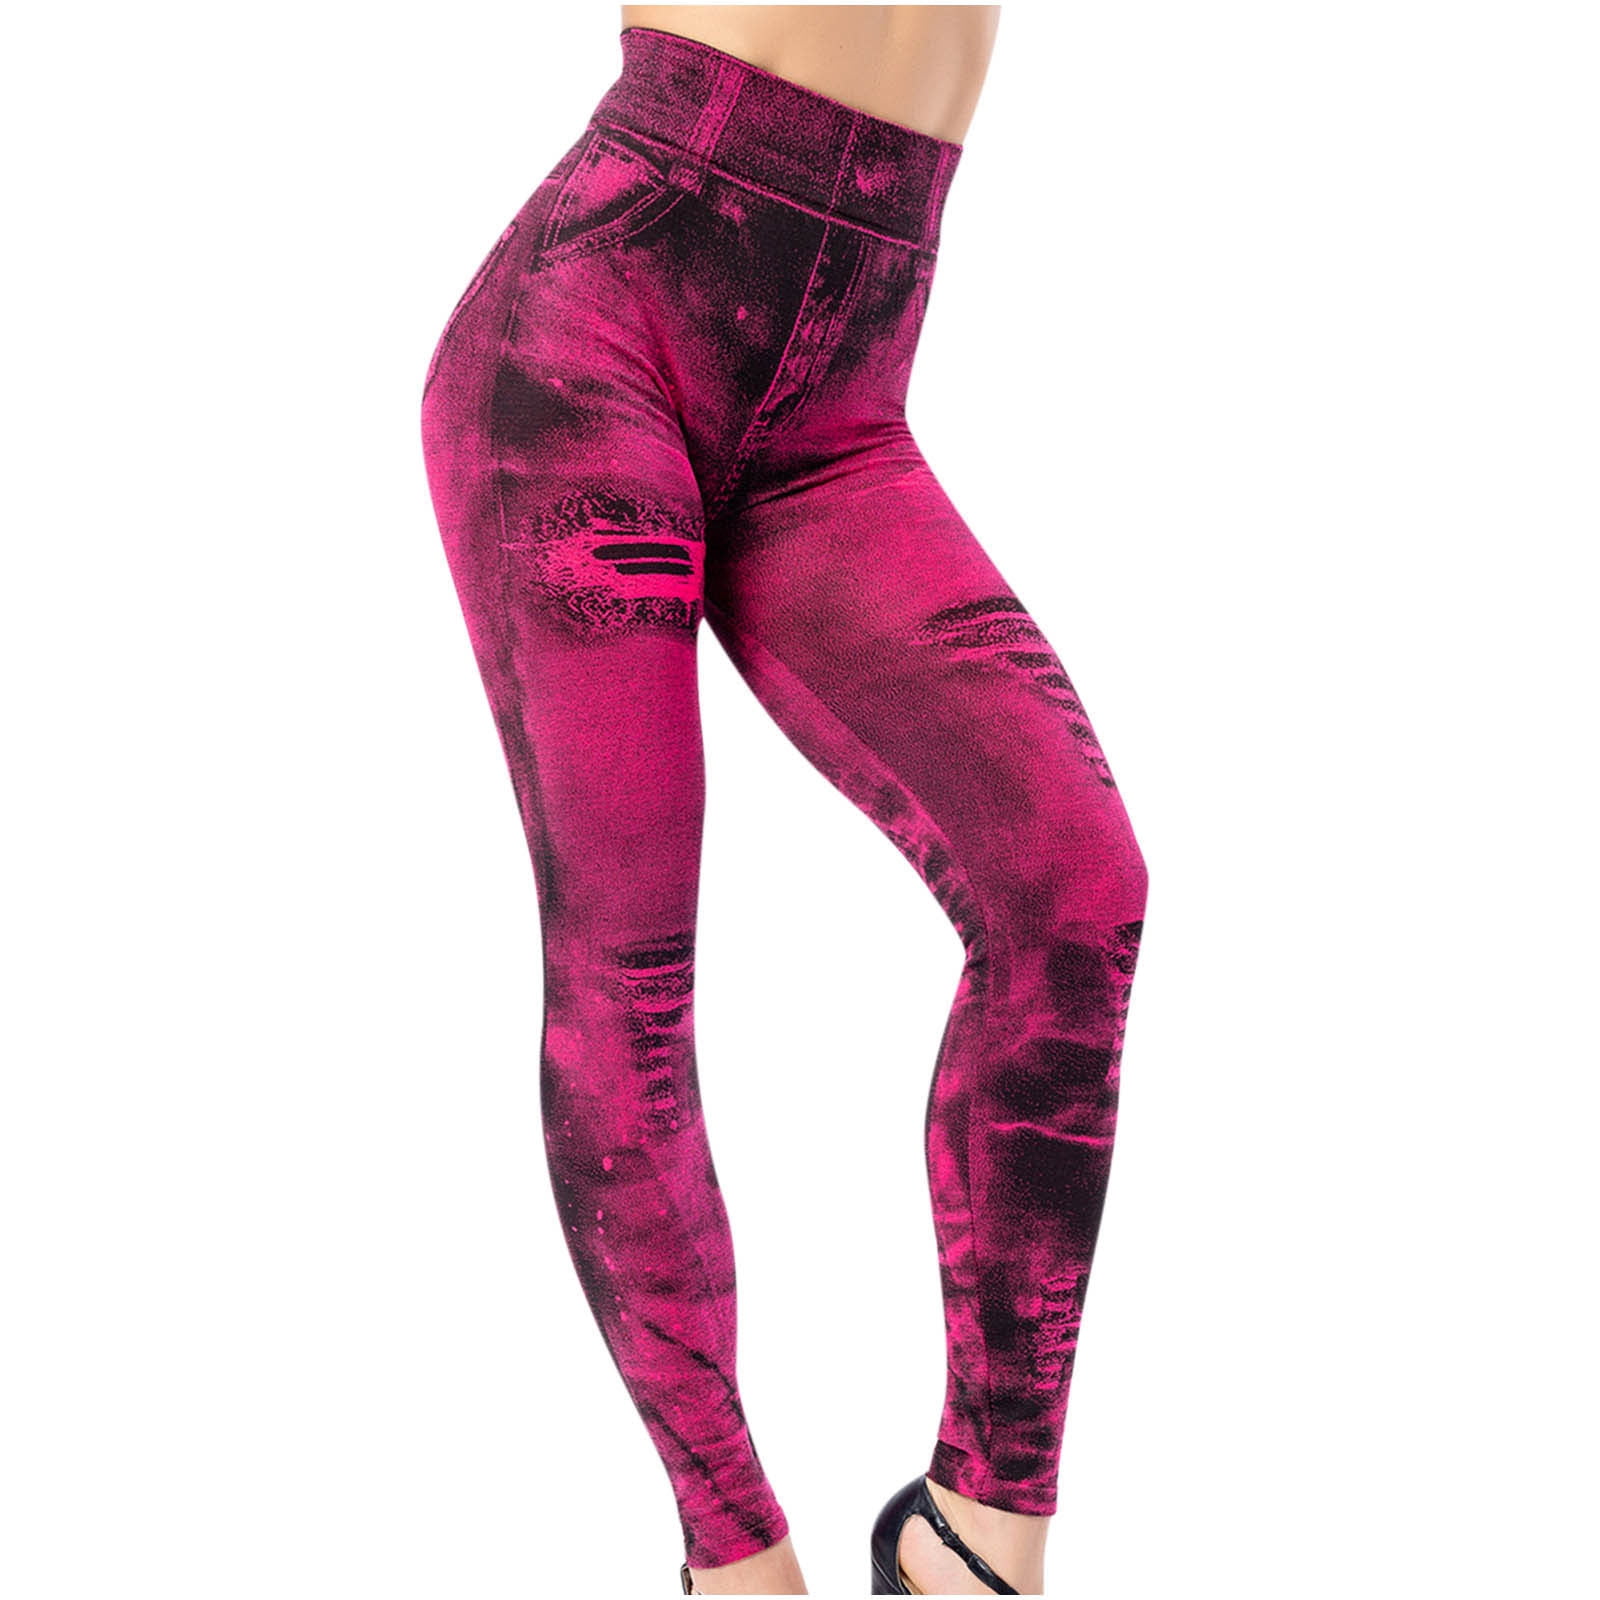 SELONE Jeggings for Women Workout Gym Running Sports Yogalicious Utility  Dressy Everyday Soft Lifting Leggings Capris Leggings for Women Capri  Jeggings Athletic Leggings for Women 19-Hot Pink L 